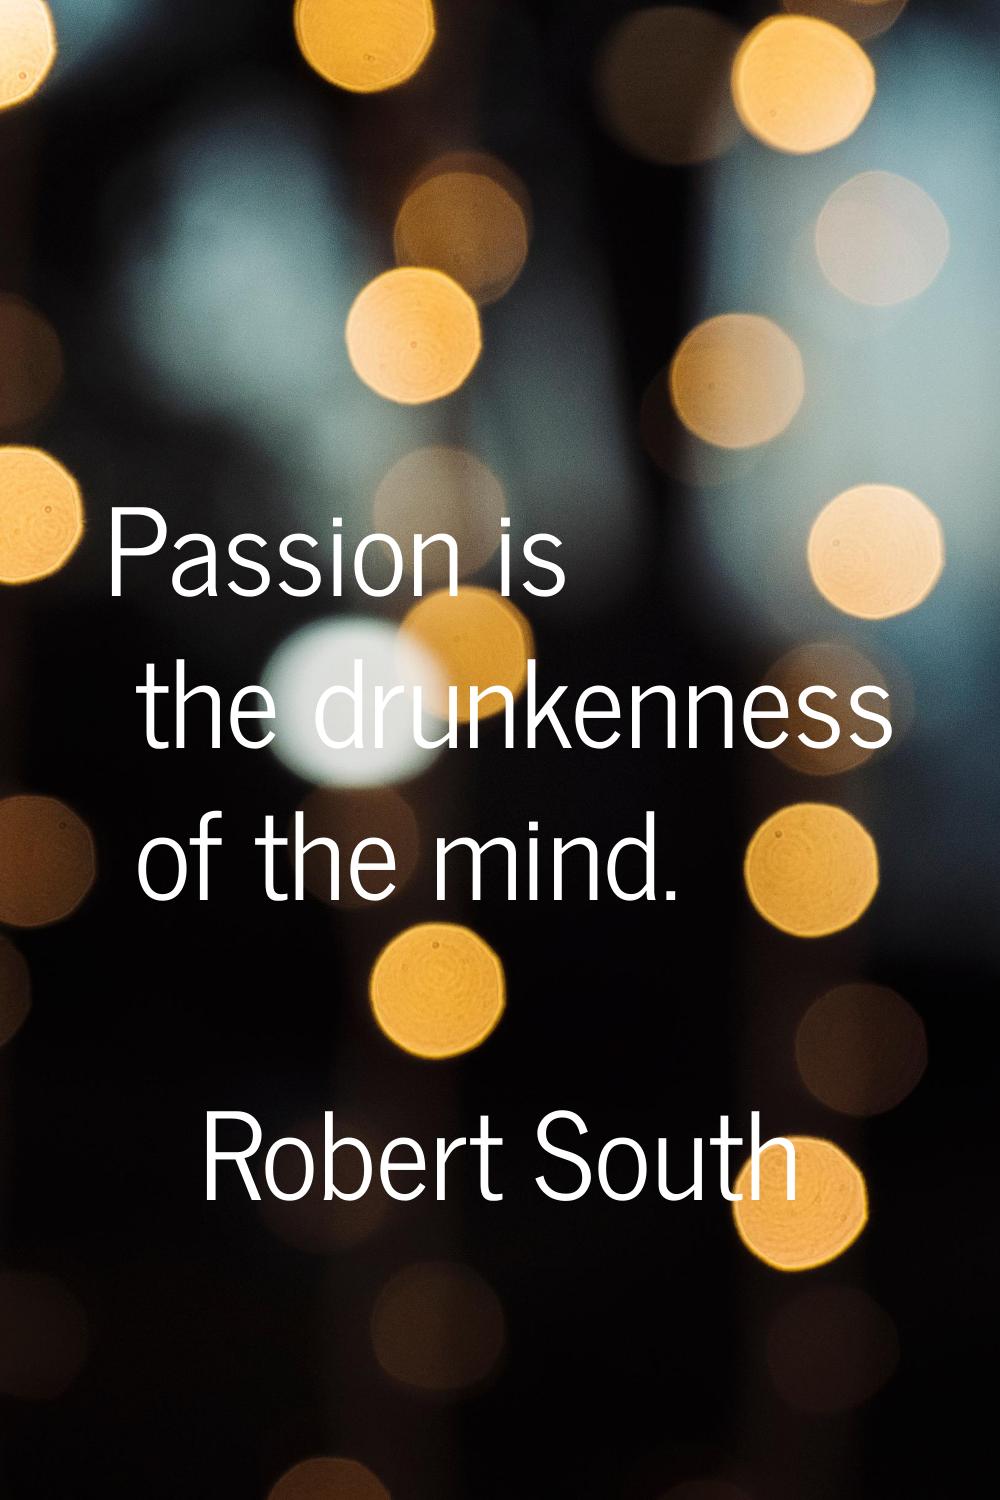 Passion is the drunkenness of the mind.